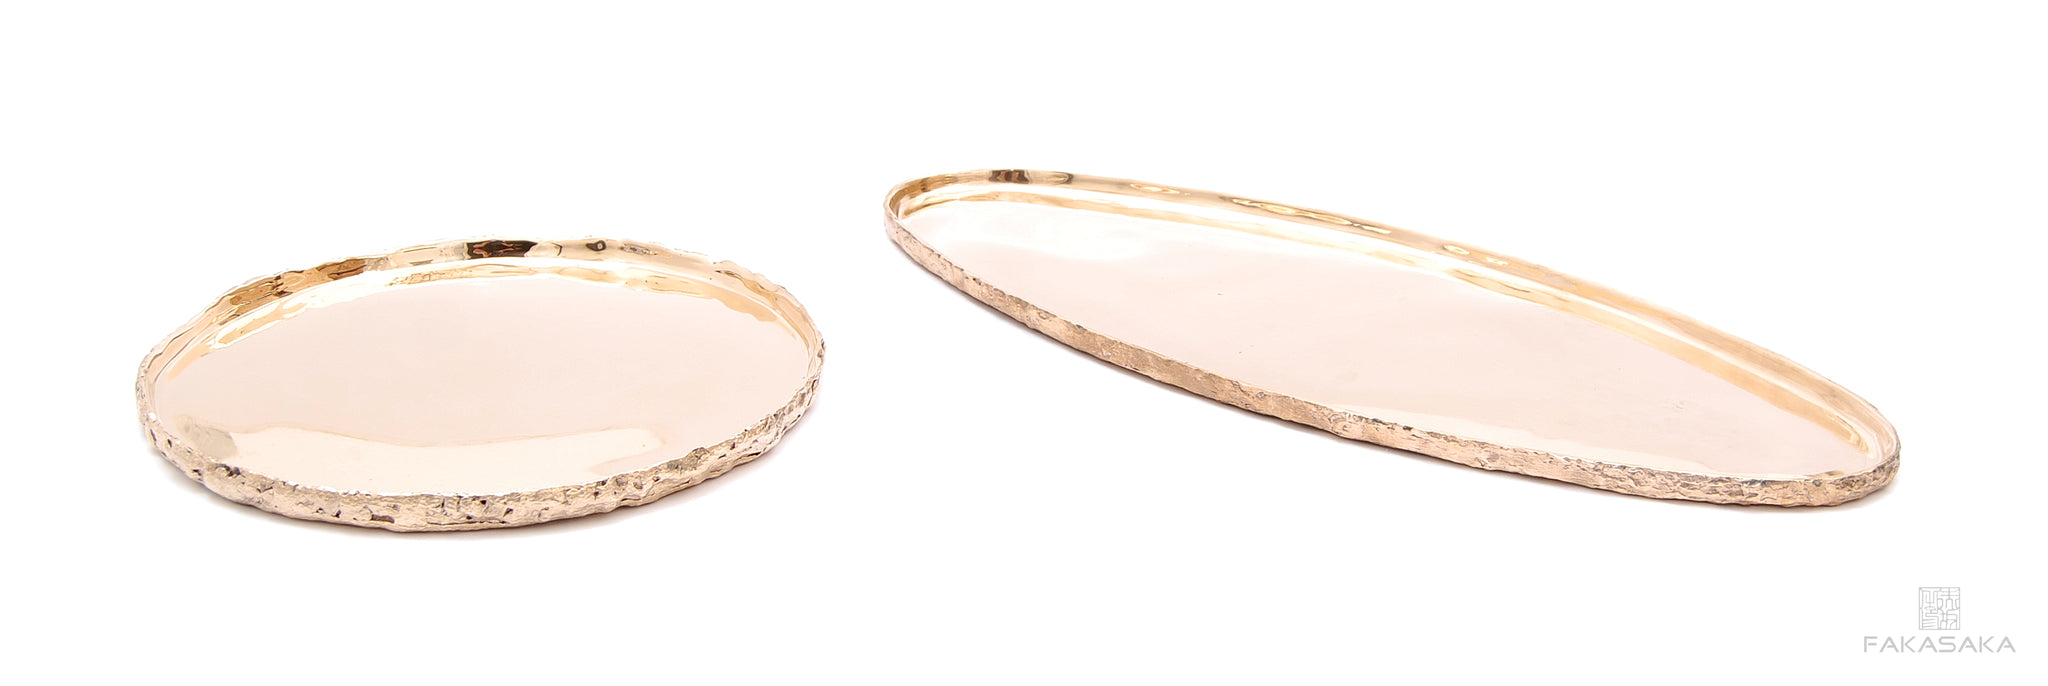 APPLE <br><br>ROUND TRAY / CENTERPIECE / CANDLE TRAY<br><br>POLISHED BRONZE